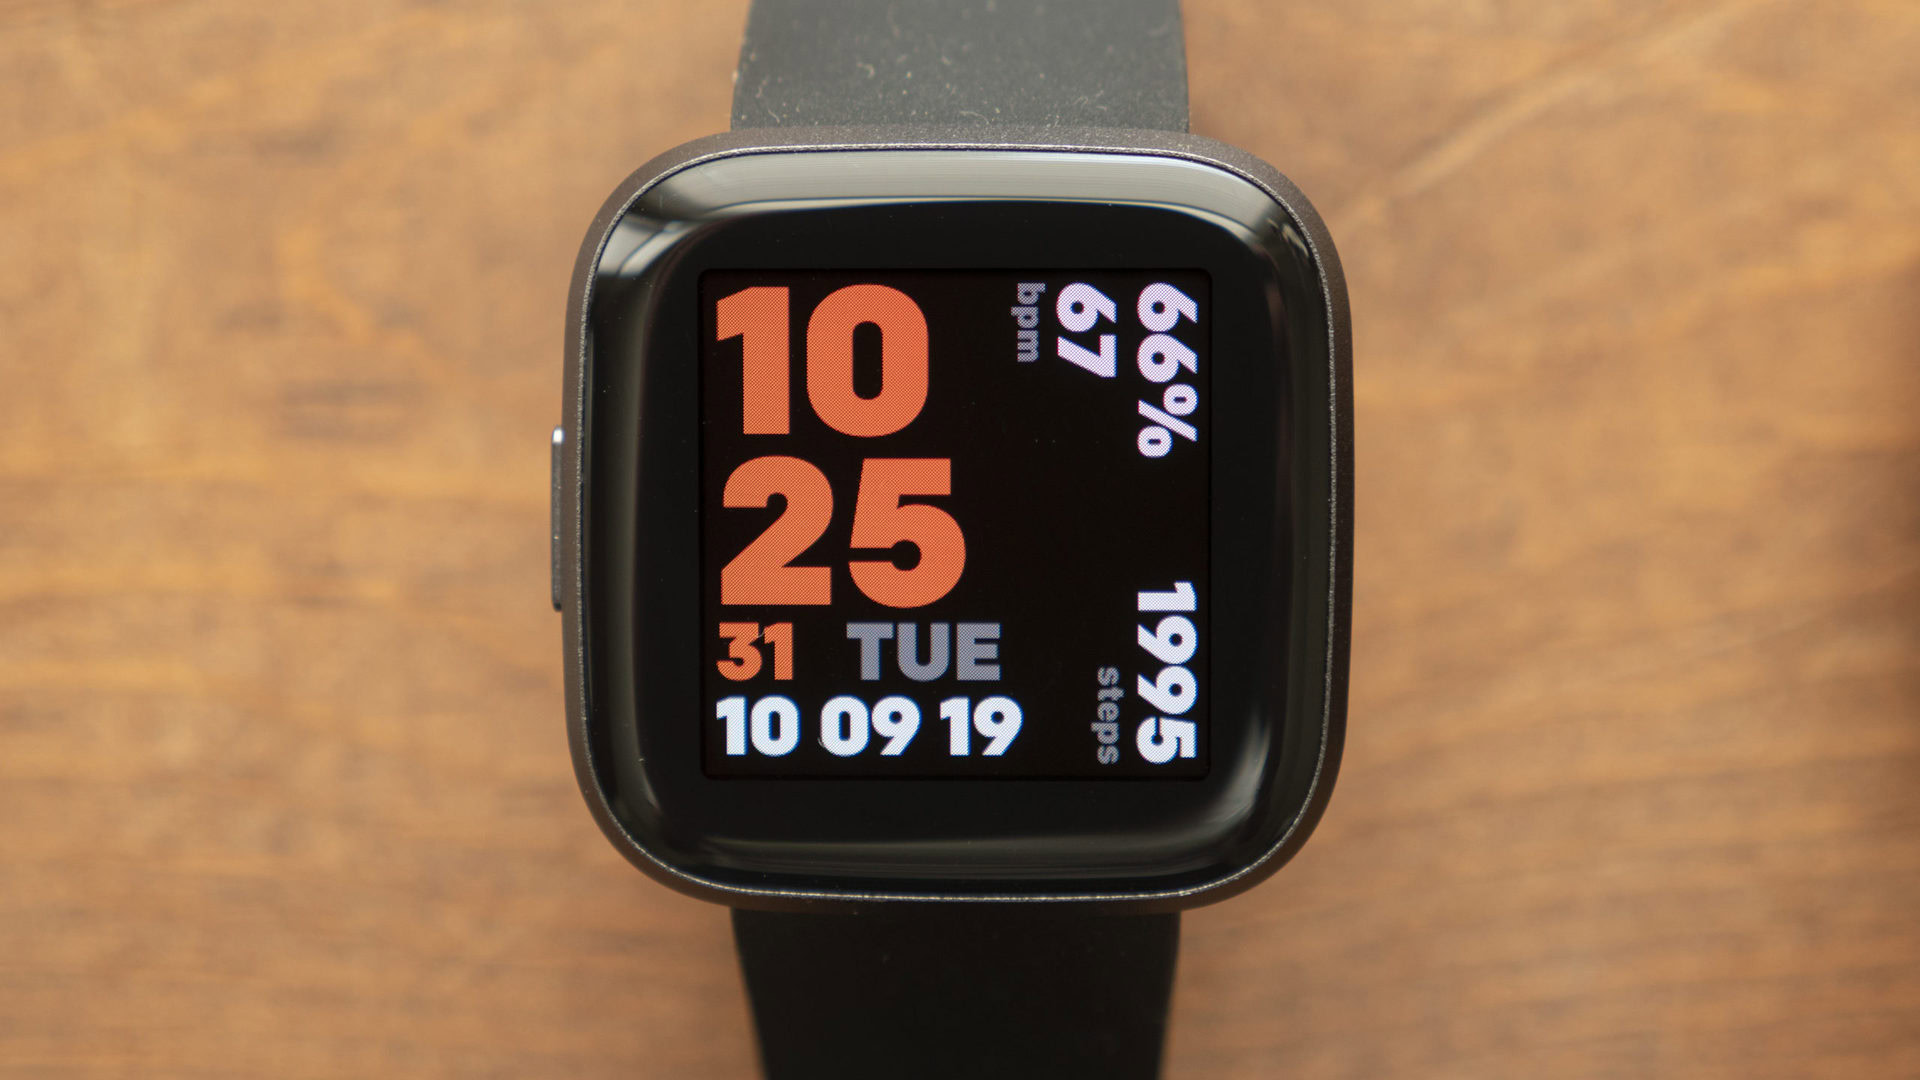 Fitbit Versa 2 review: Just short of greatness